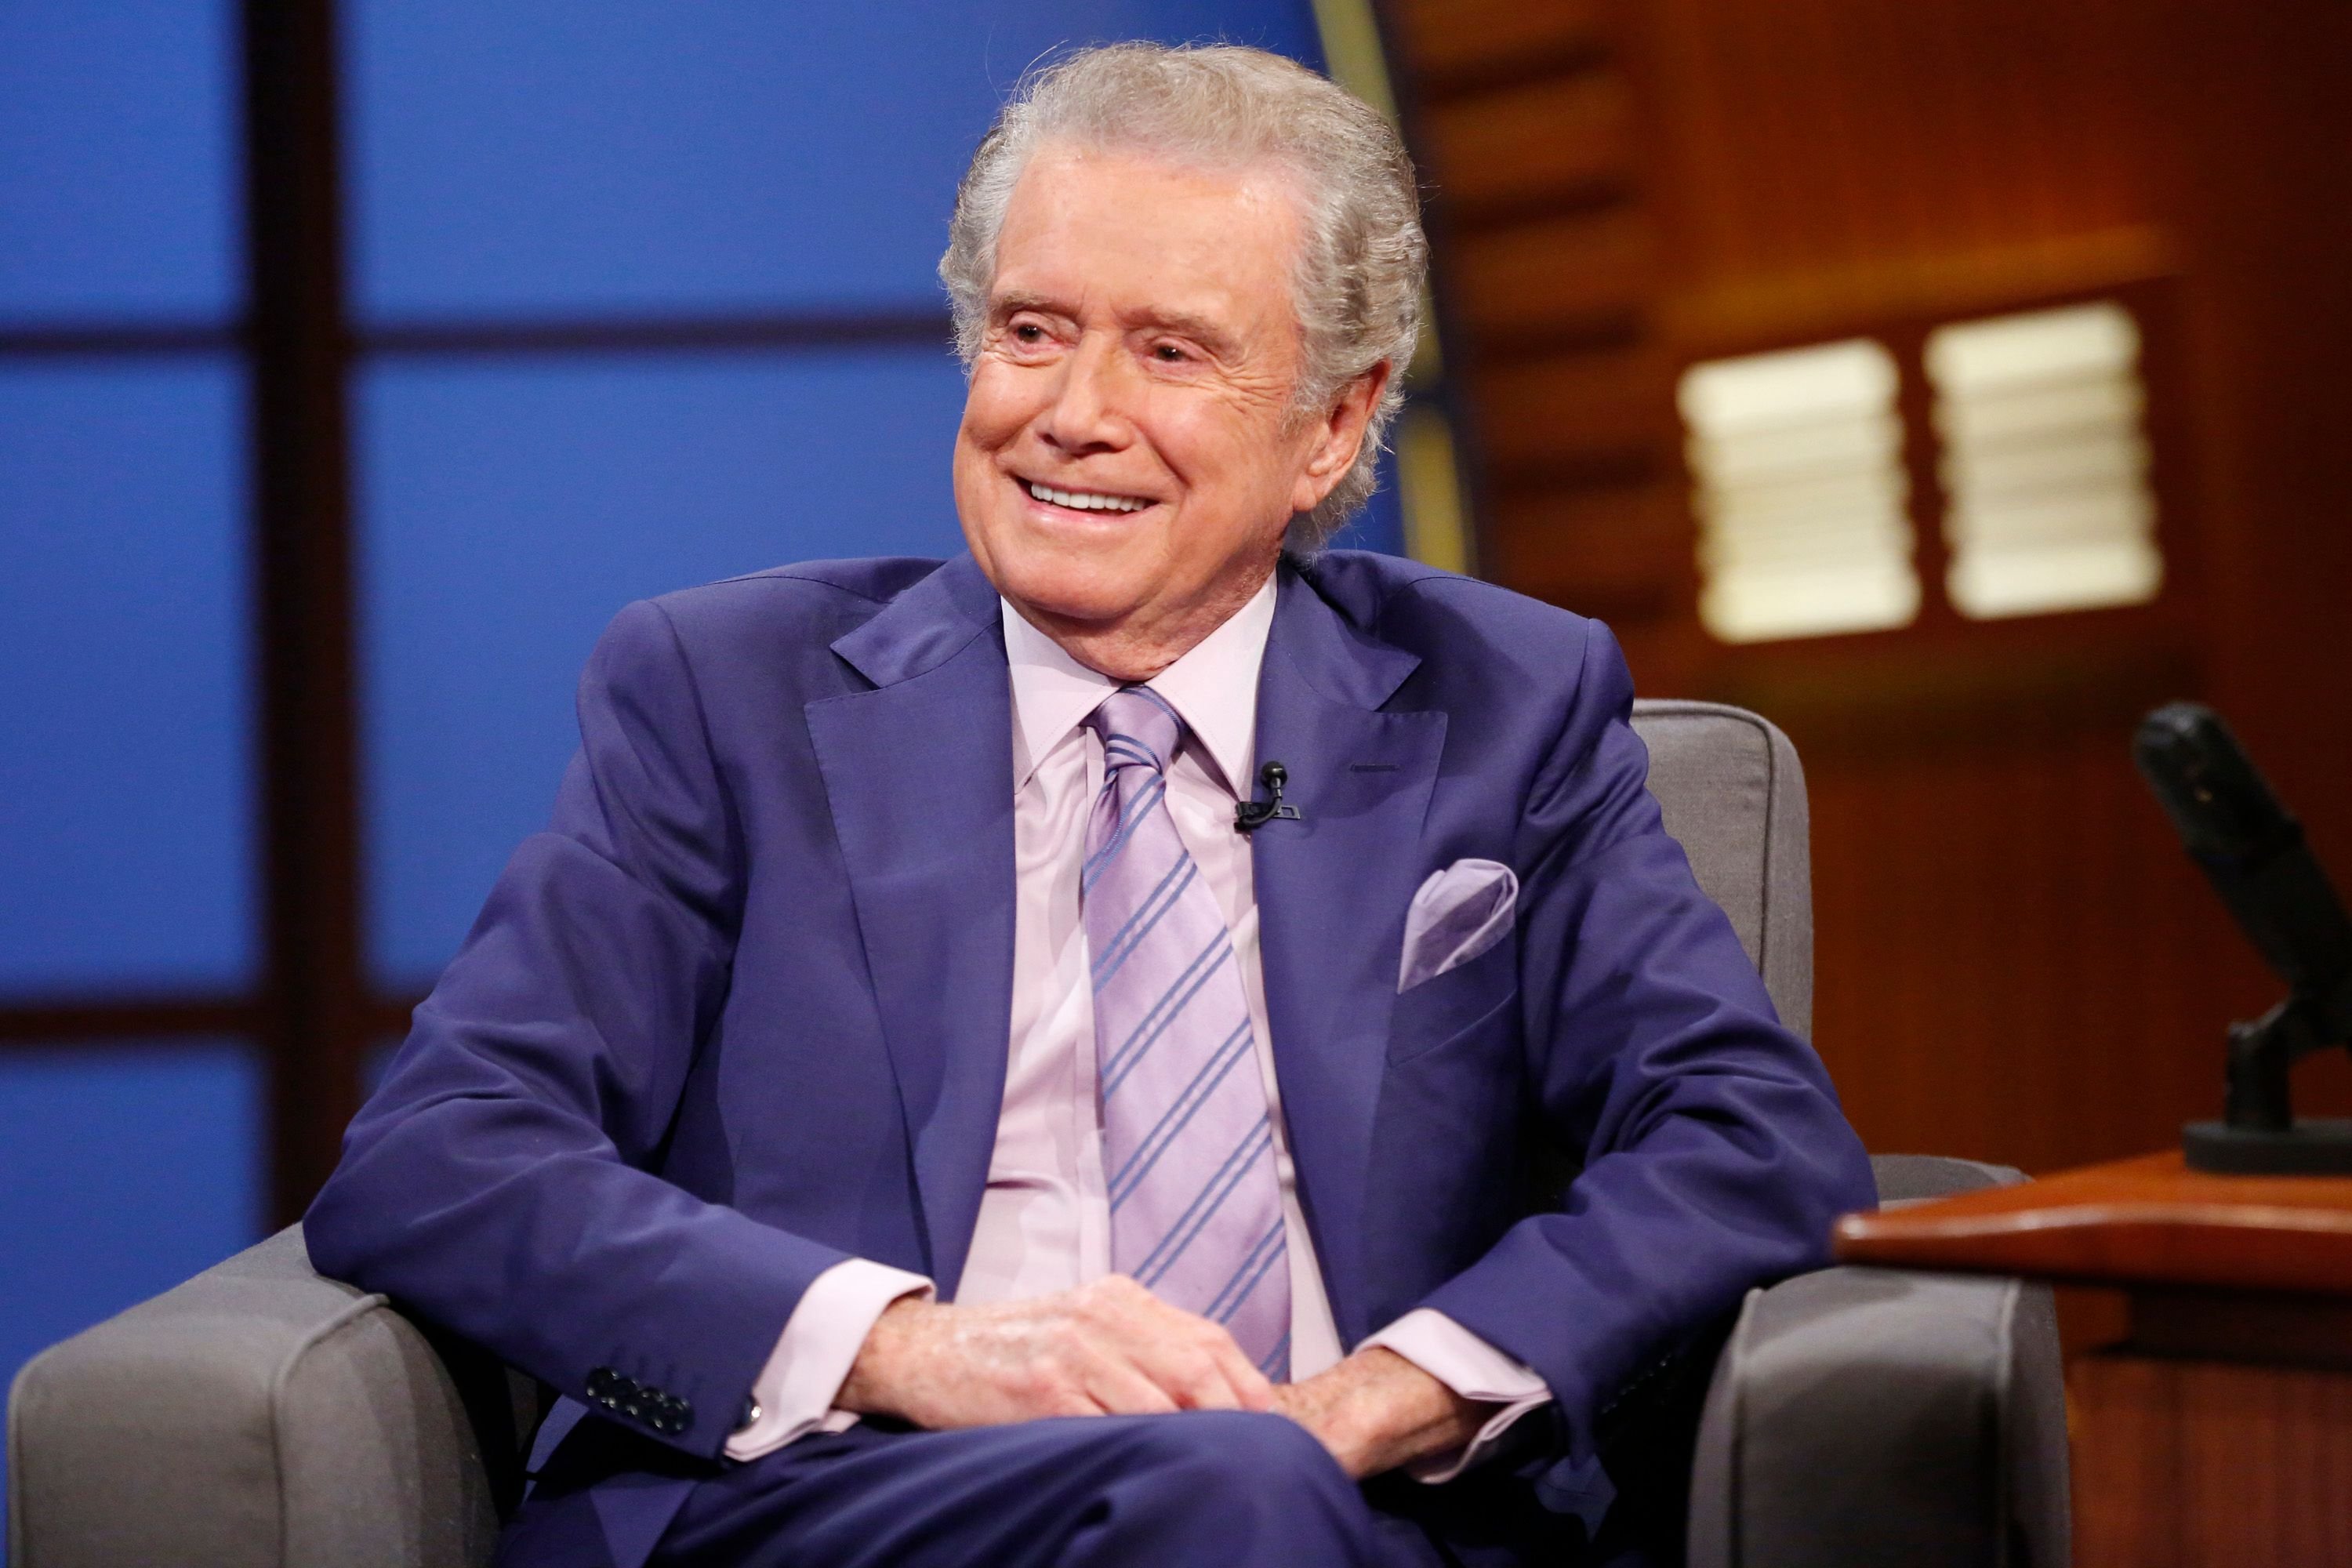 Regis Philbin during an interview on "Late Night with Seth Meyers" on July 16, 2014 | Photo: Getty Images